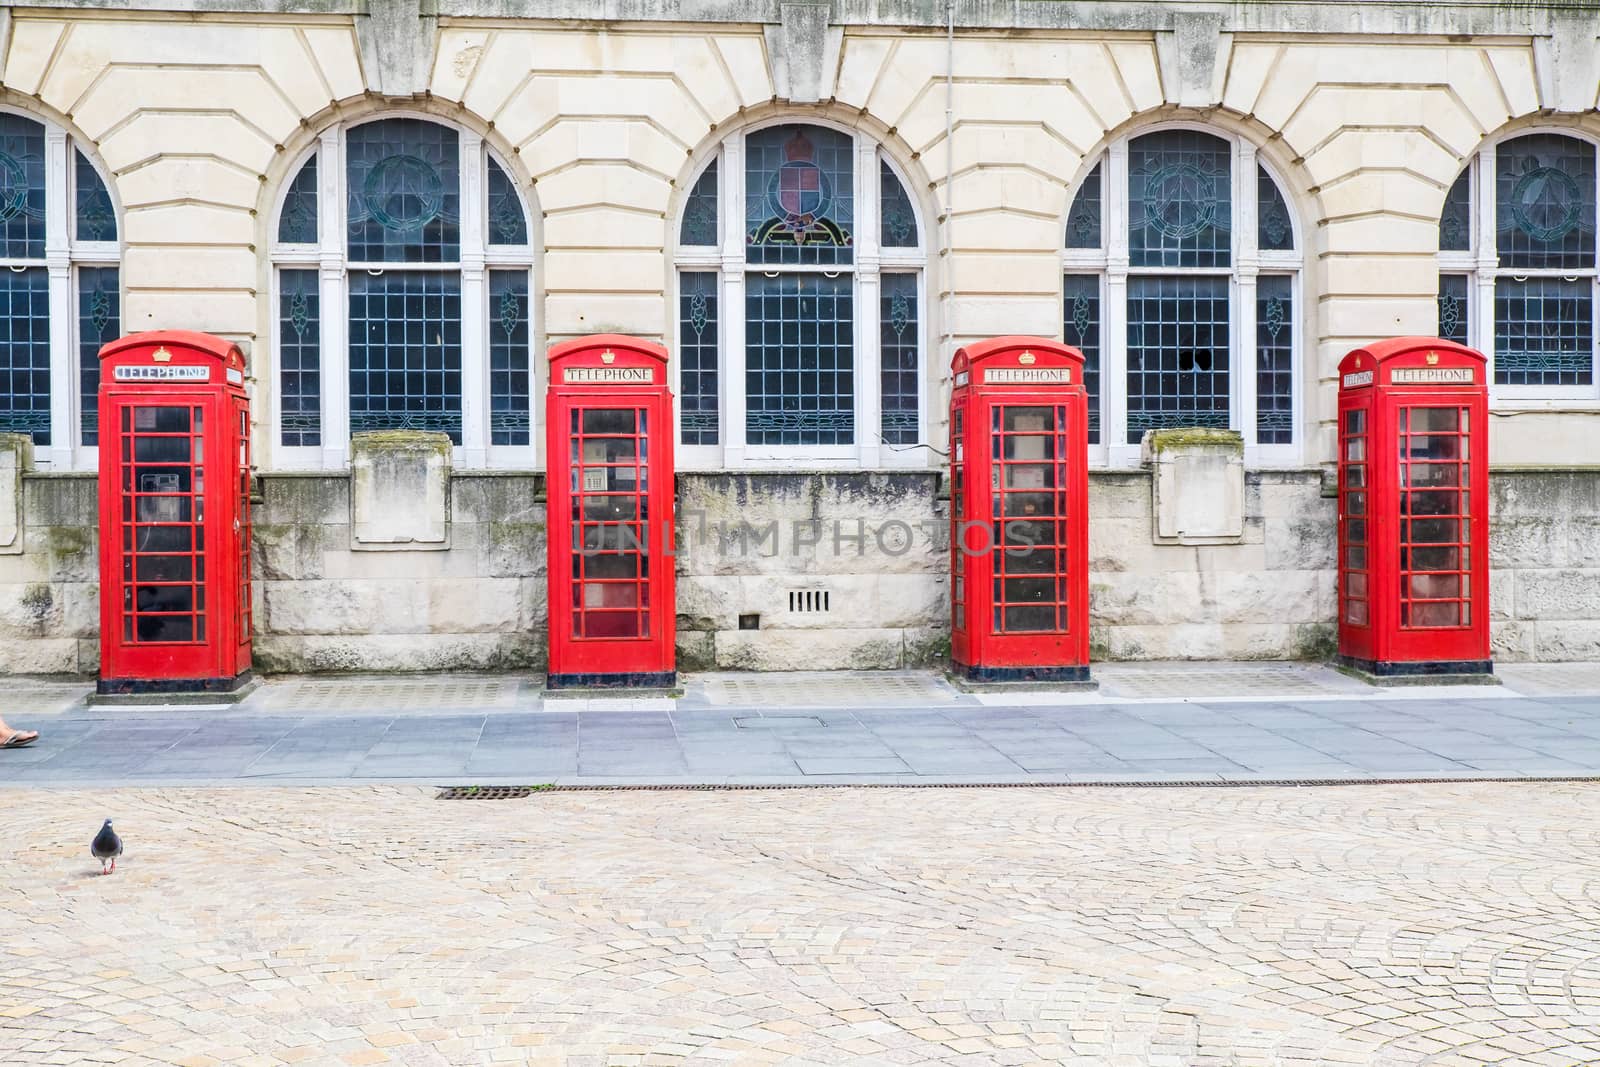 Row of beautiful old fashioned British red Telephone boxes